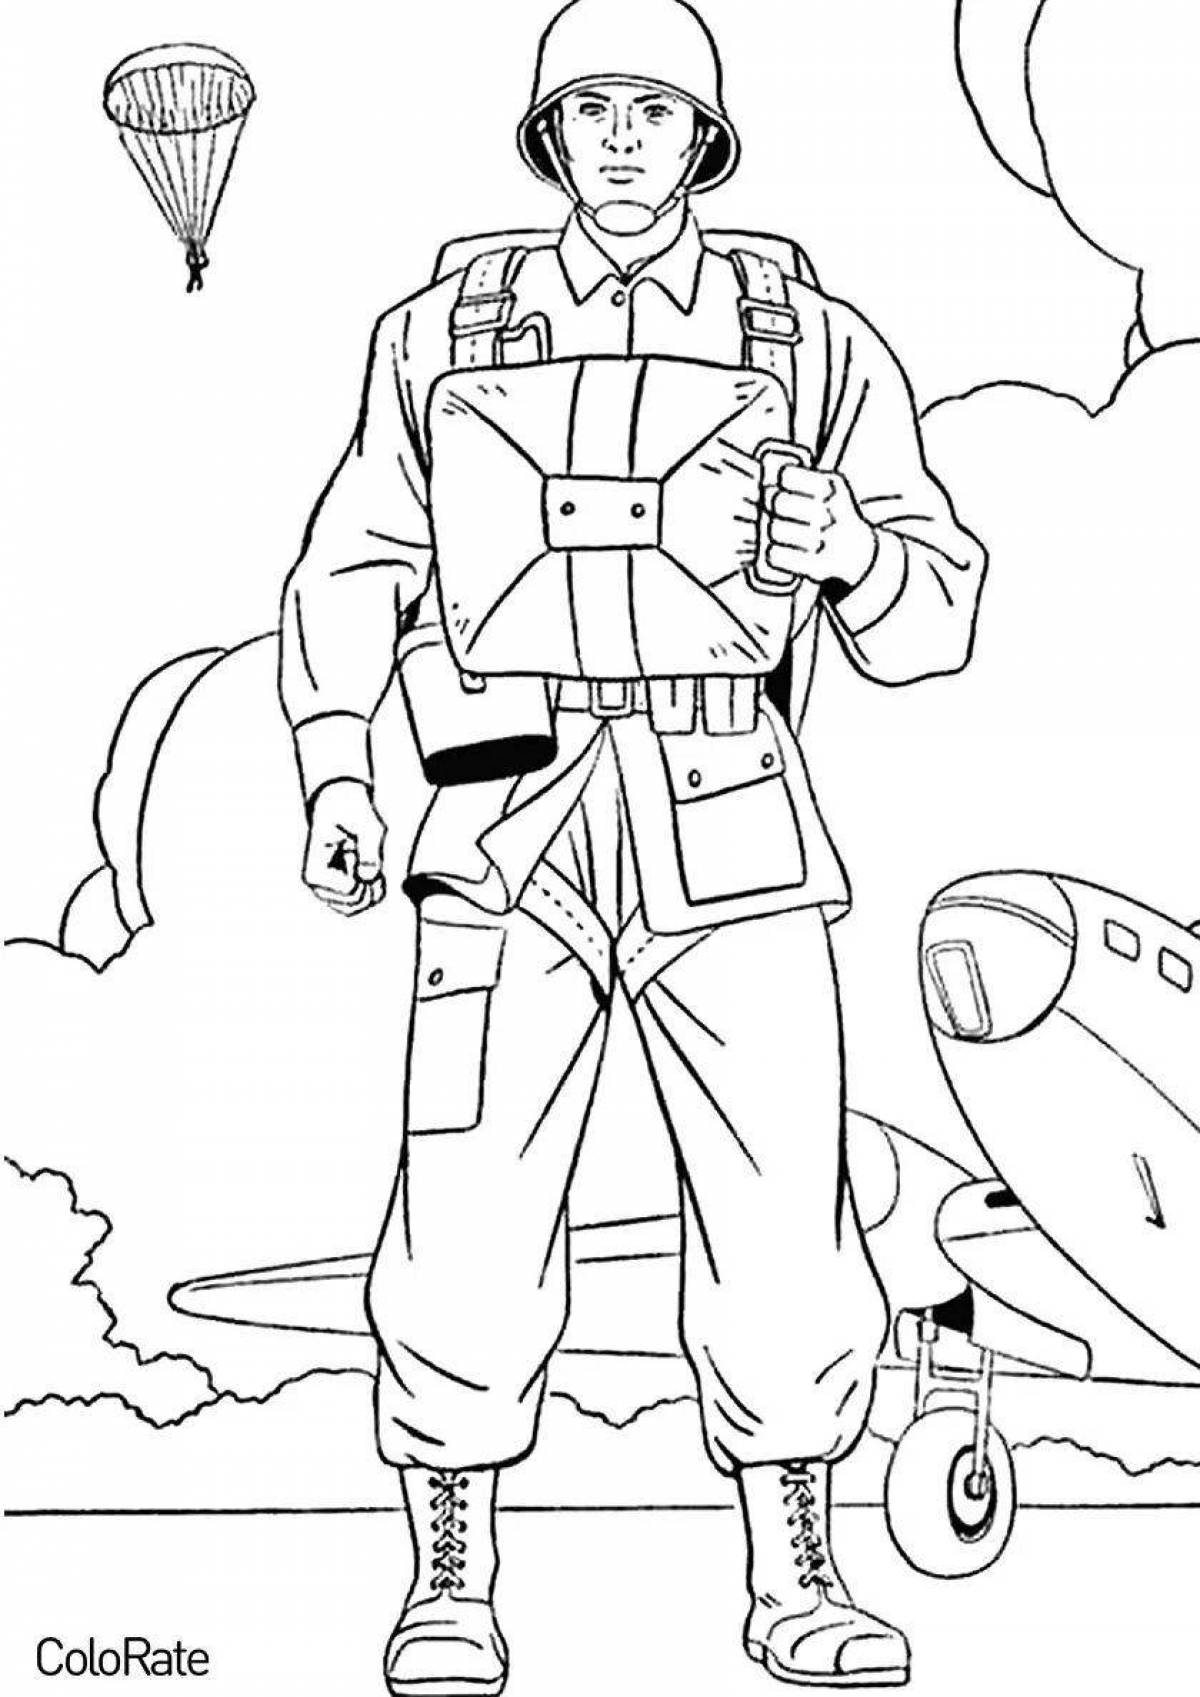 Adorable military pilot coloring pages for kids